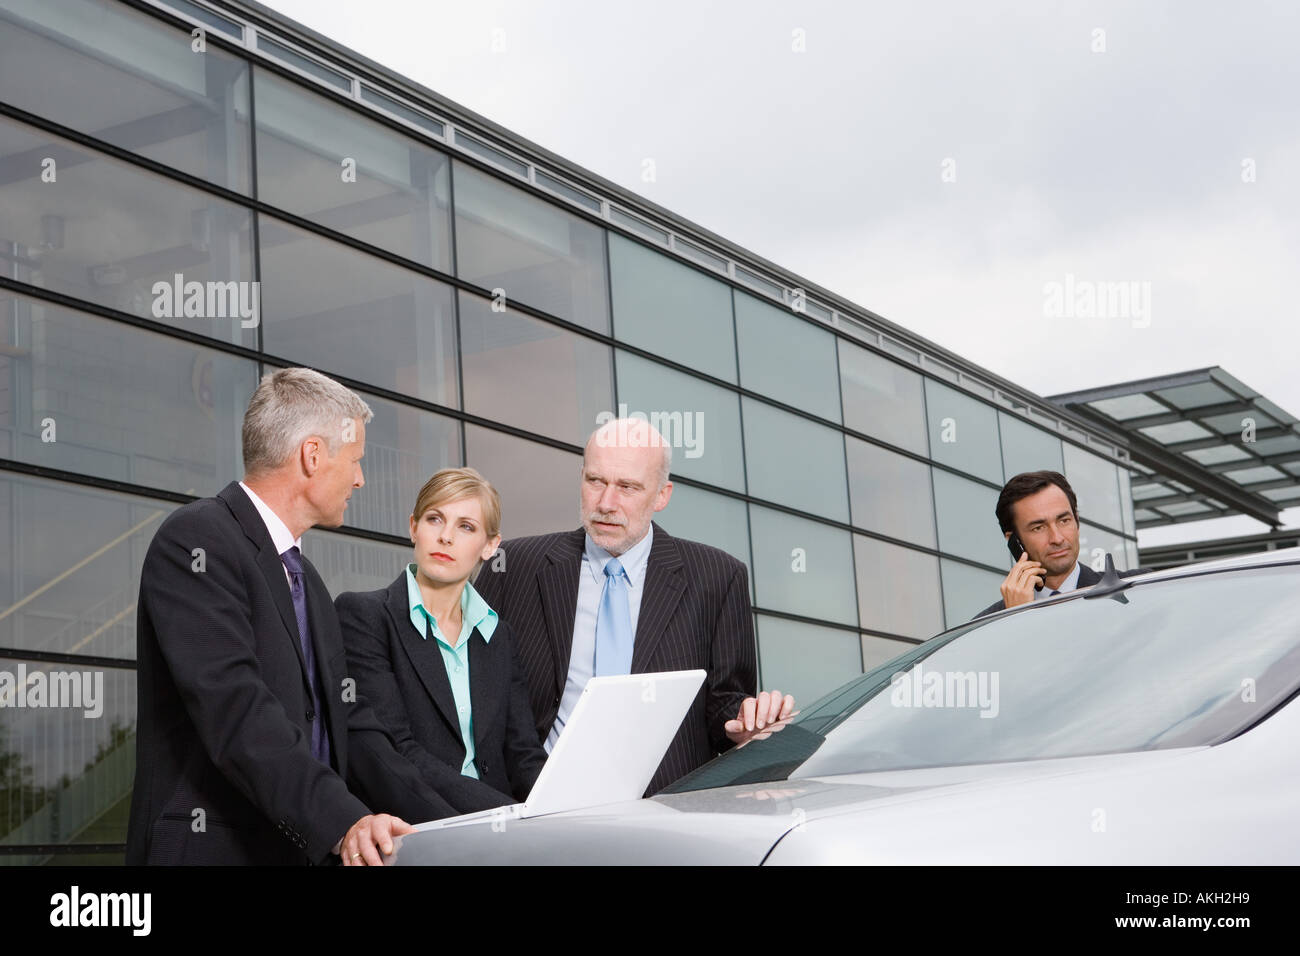 Businesspeople looking at laptop on automobile boot Stock Photo